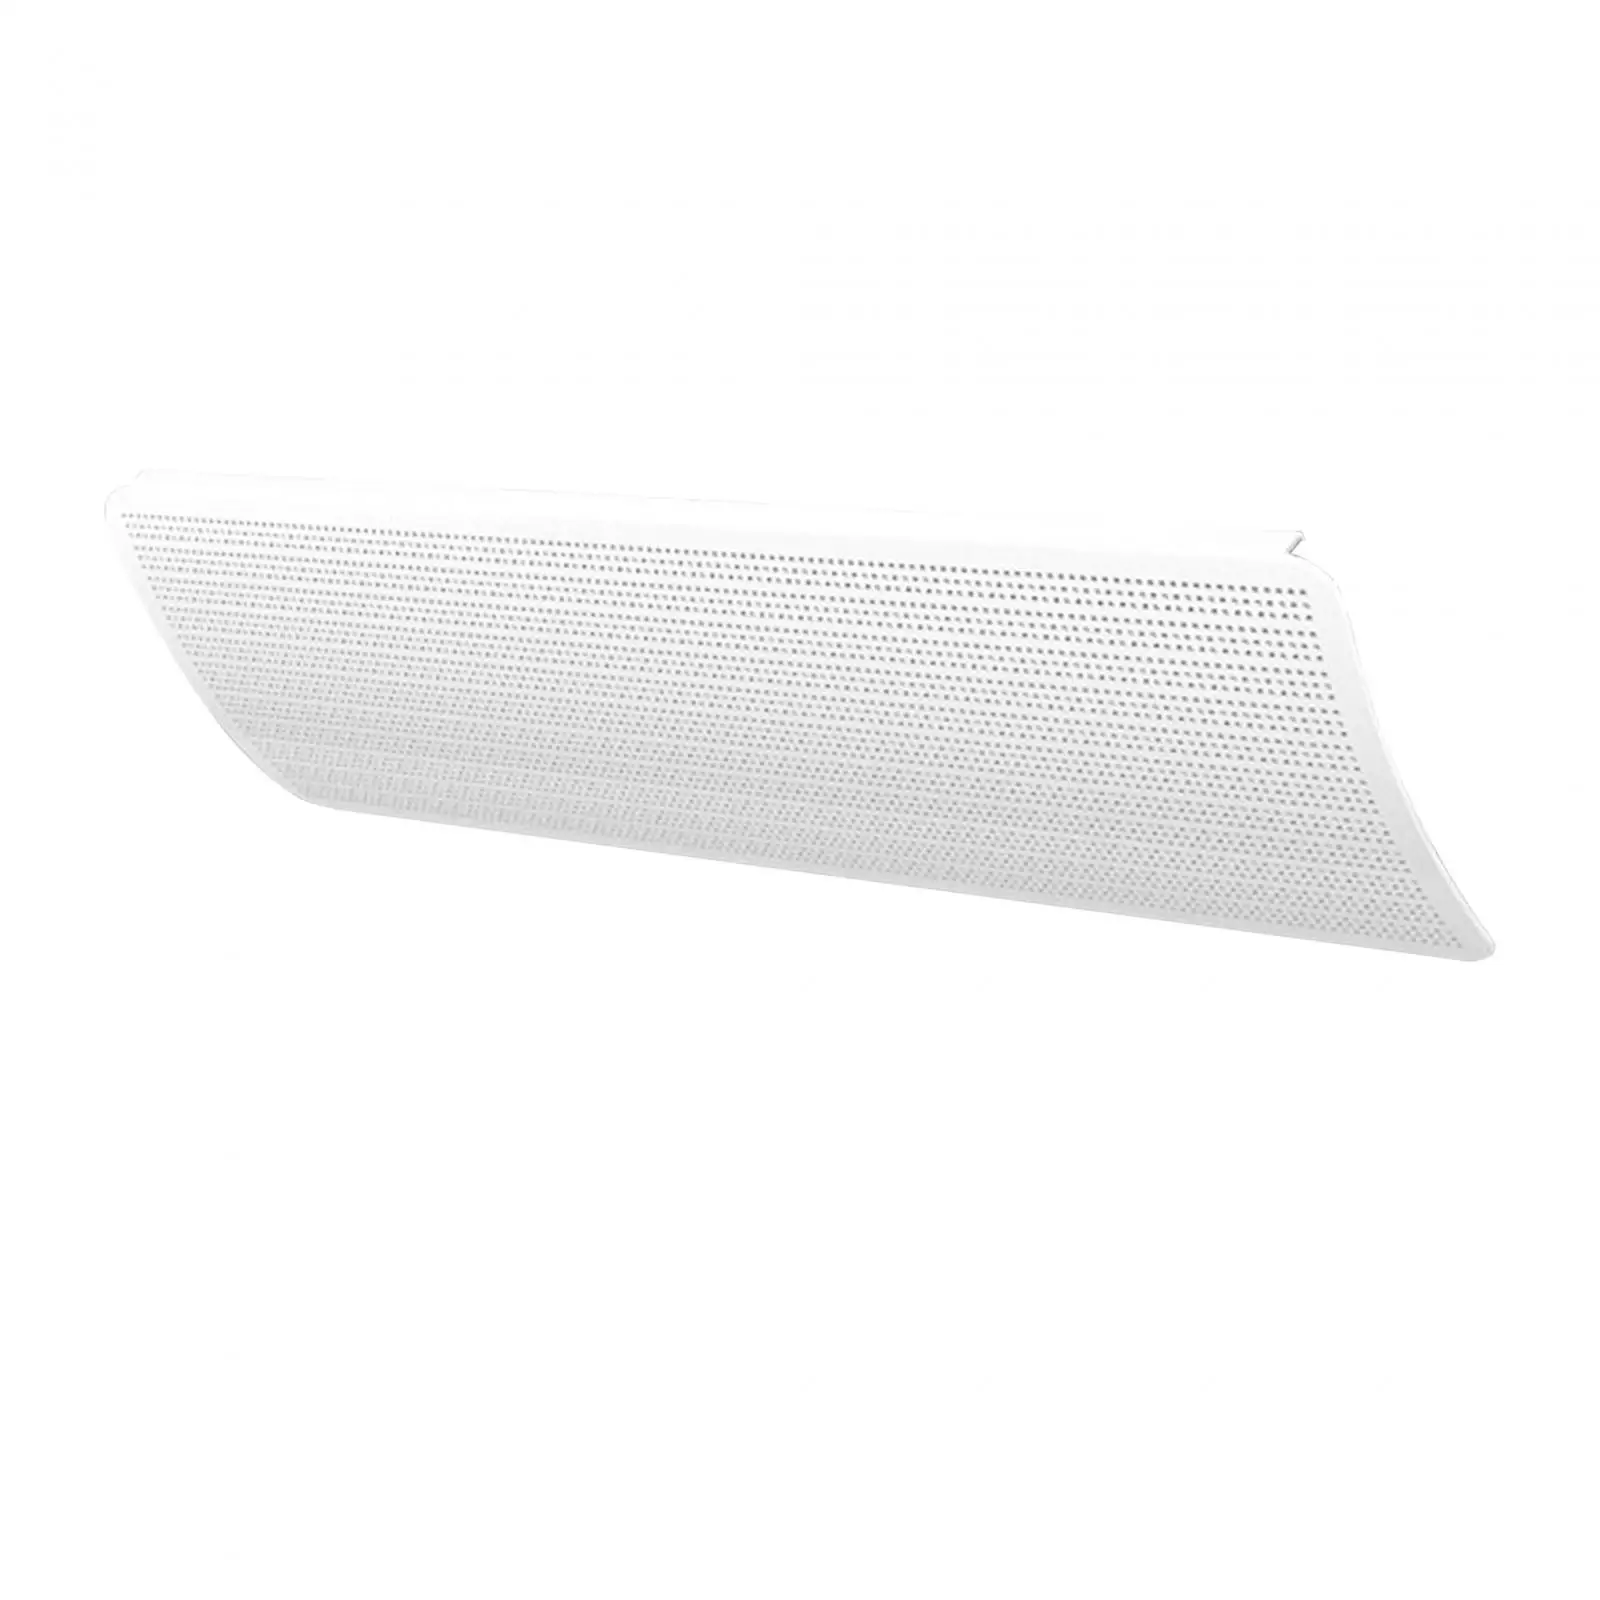 Central Air Conditioner Air Deflector Vent Deflector Side Sturdy Adjustable